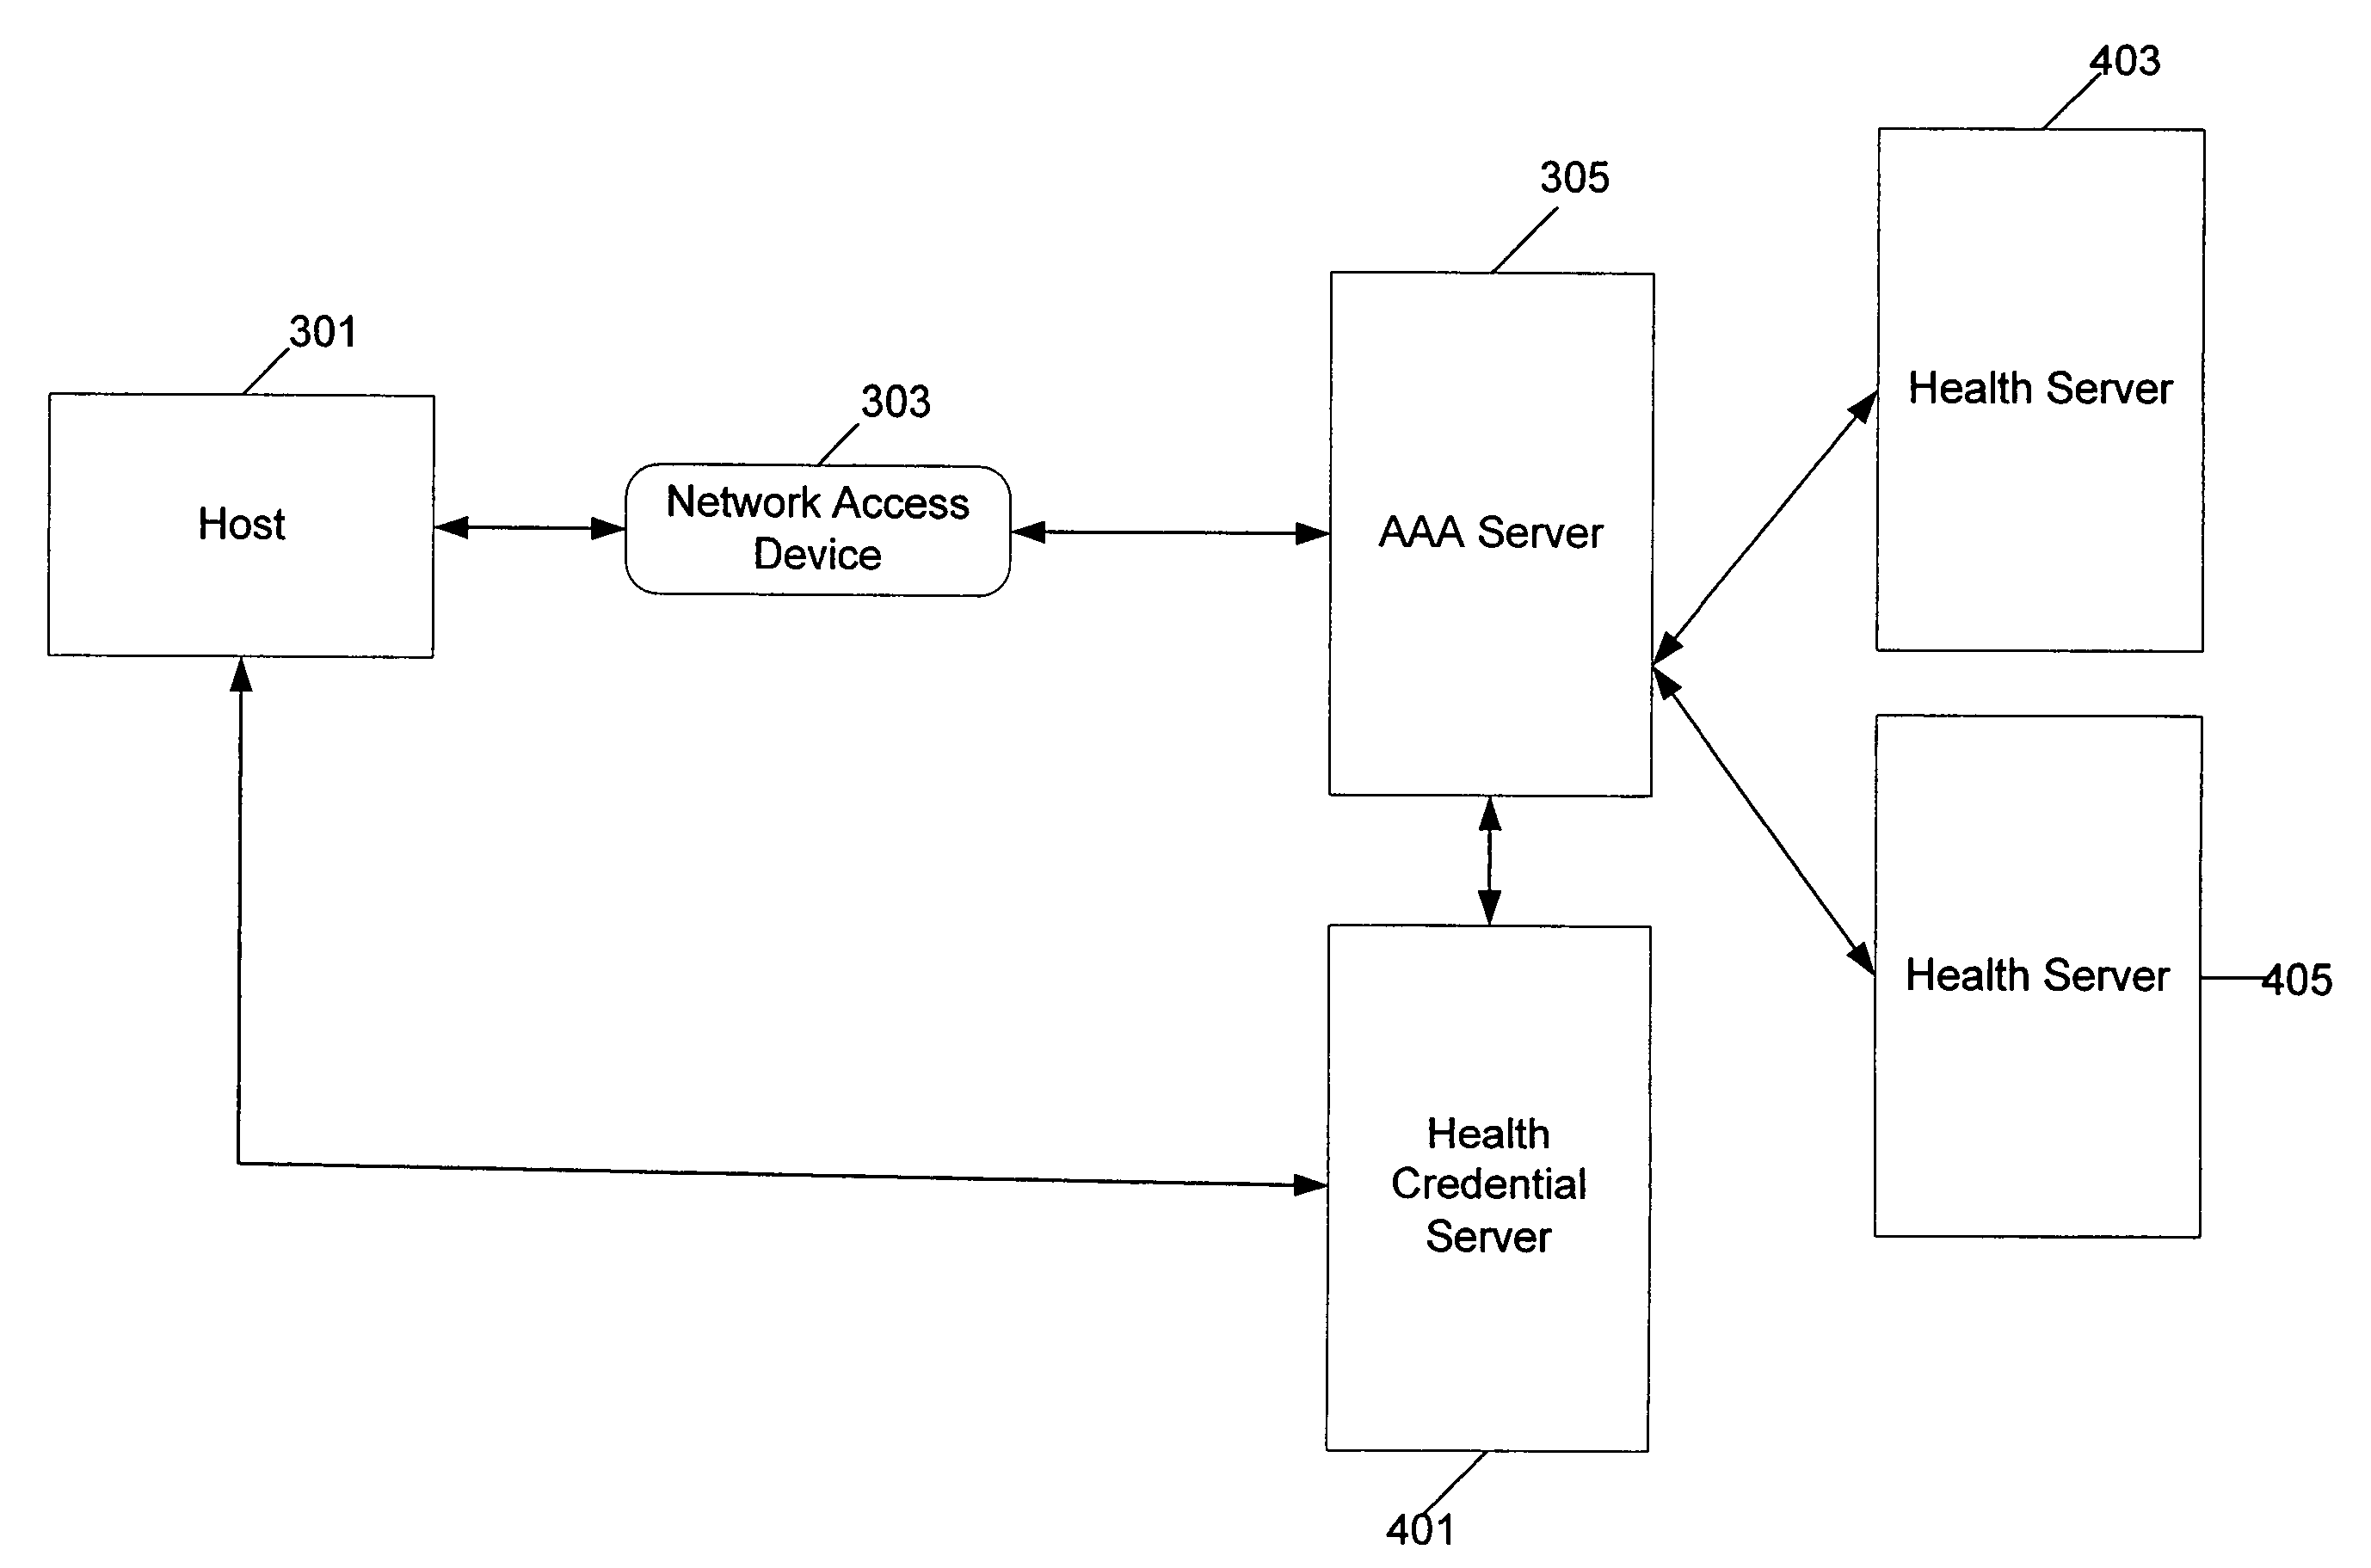 Managing access to a network